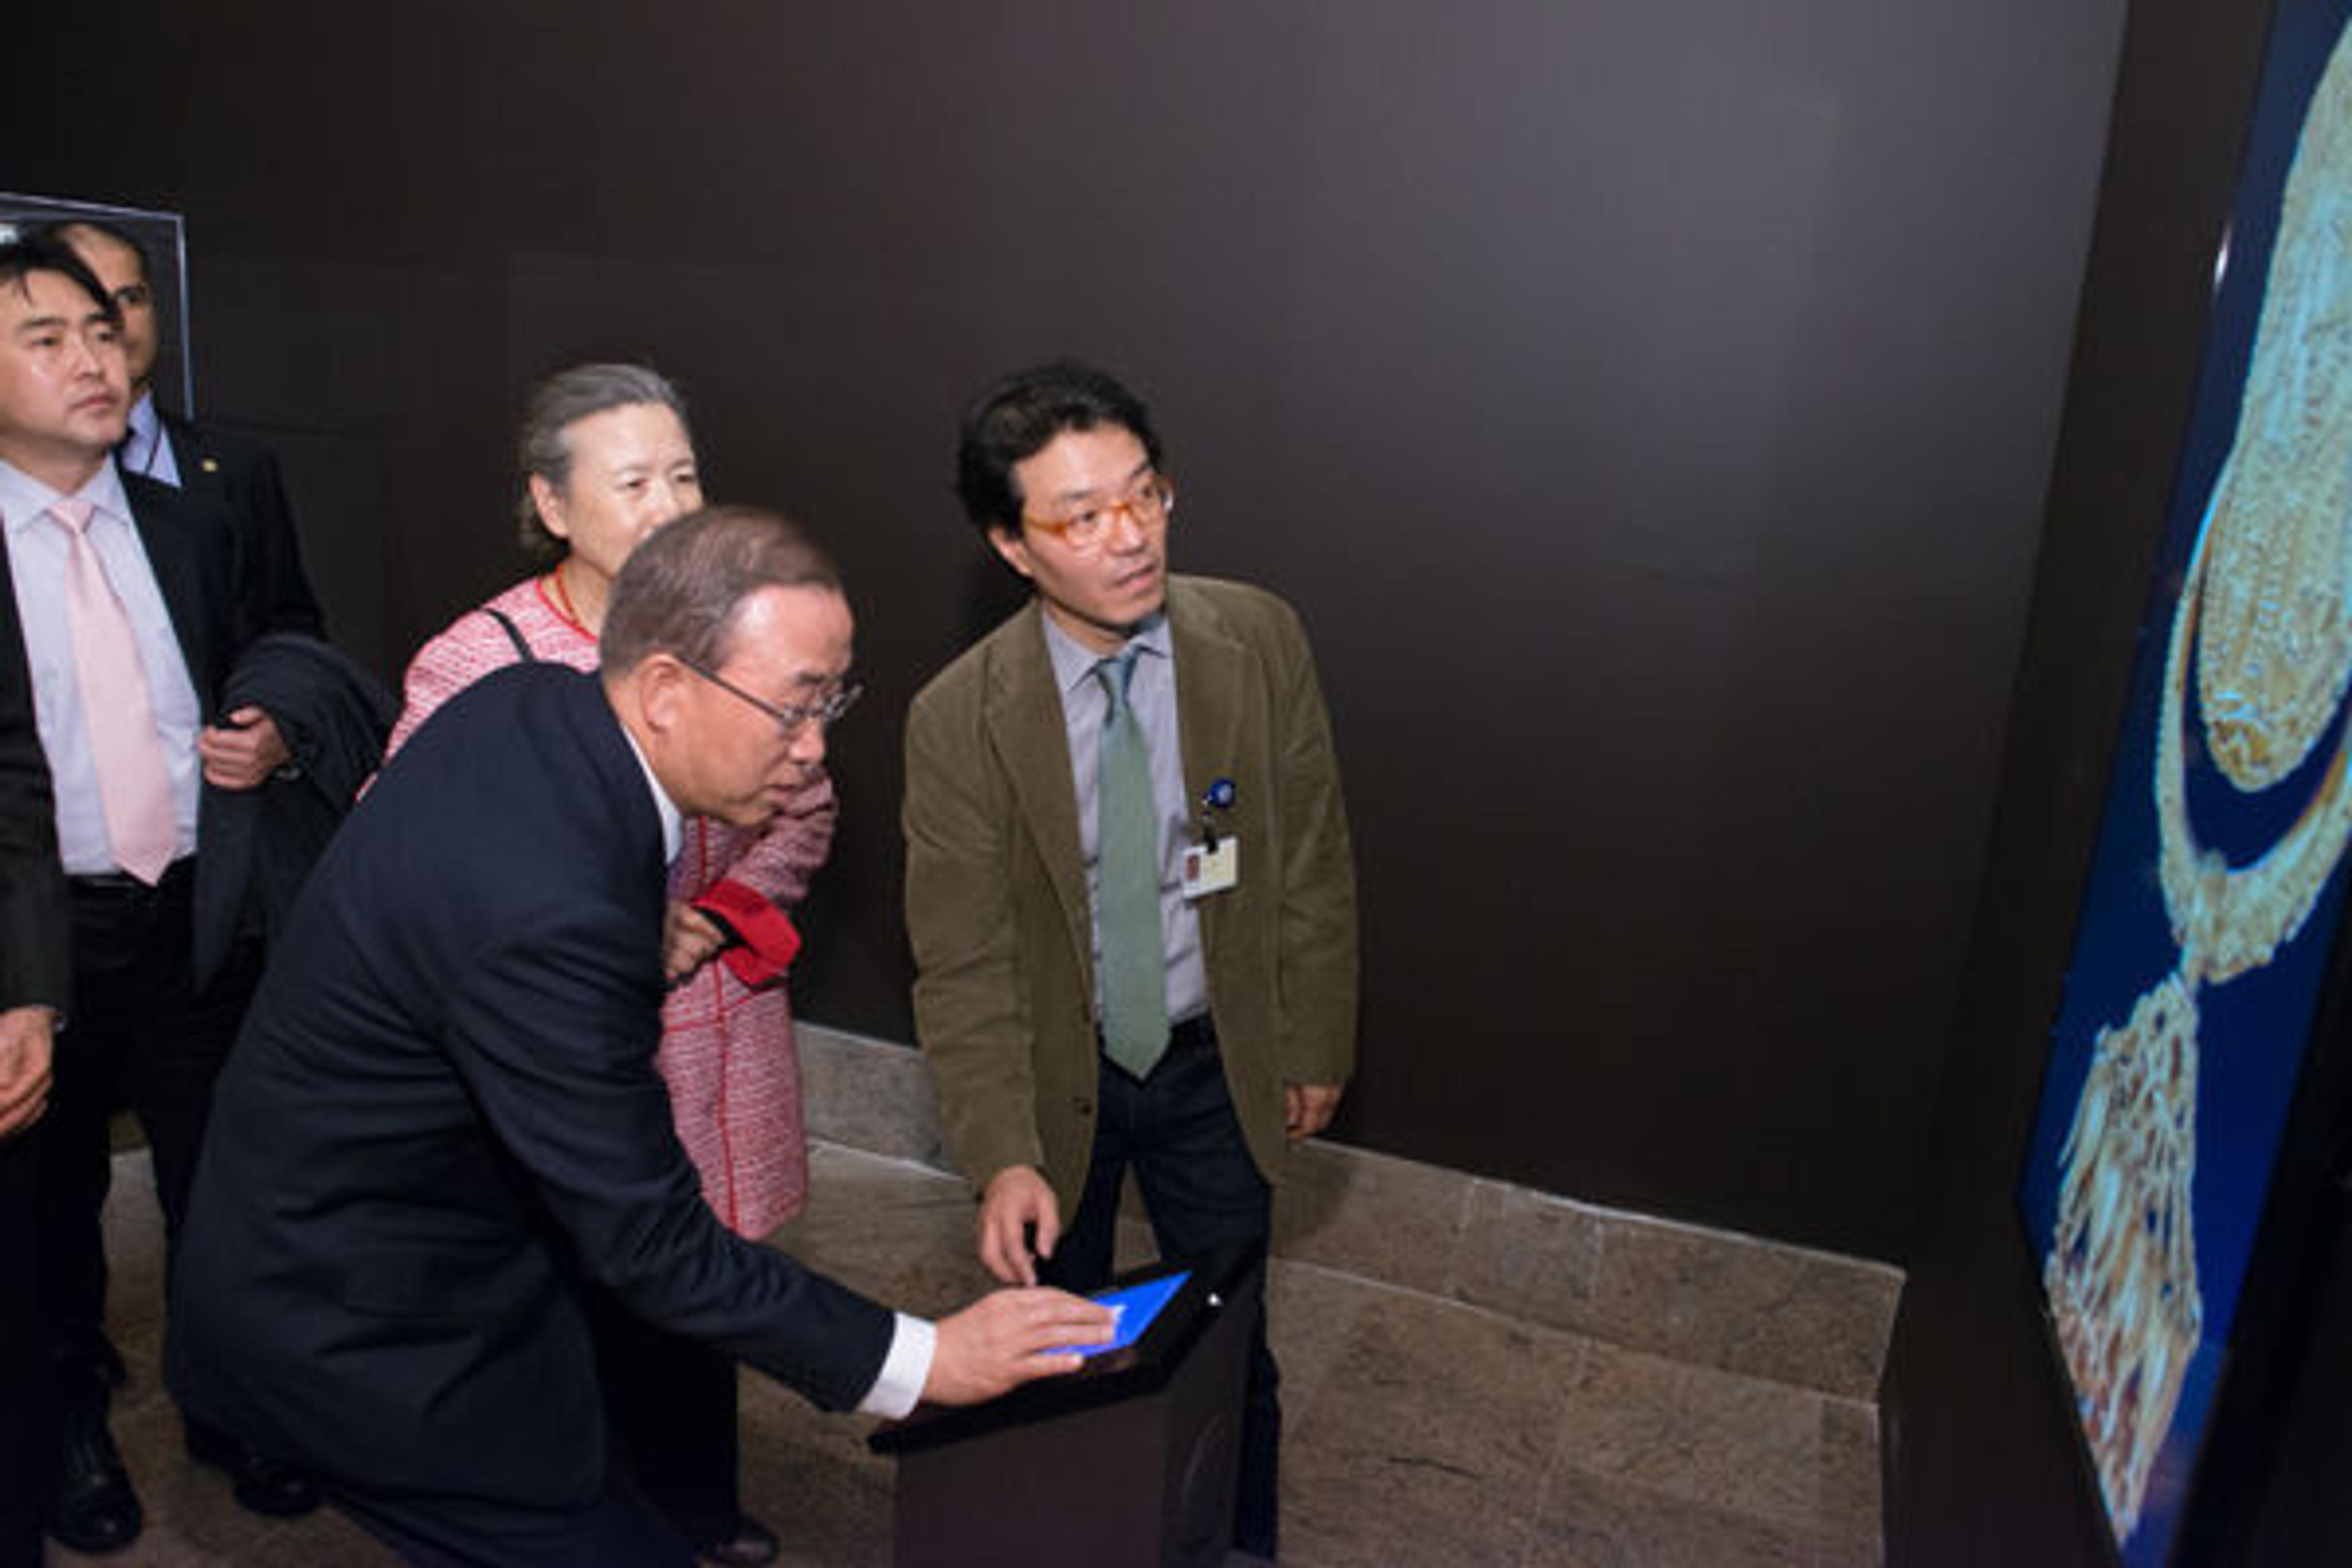 UN Secretary General Ban Ki-moon tries out the interactive feature on the tablet-to-screen device